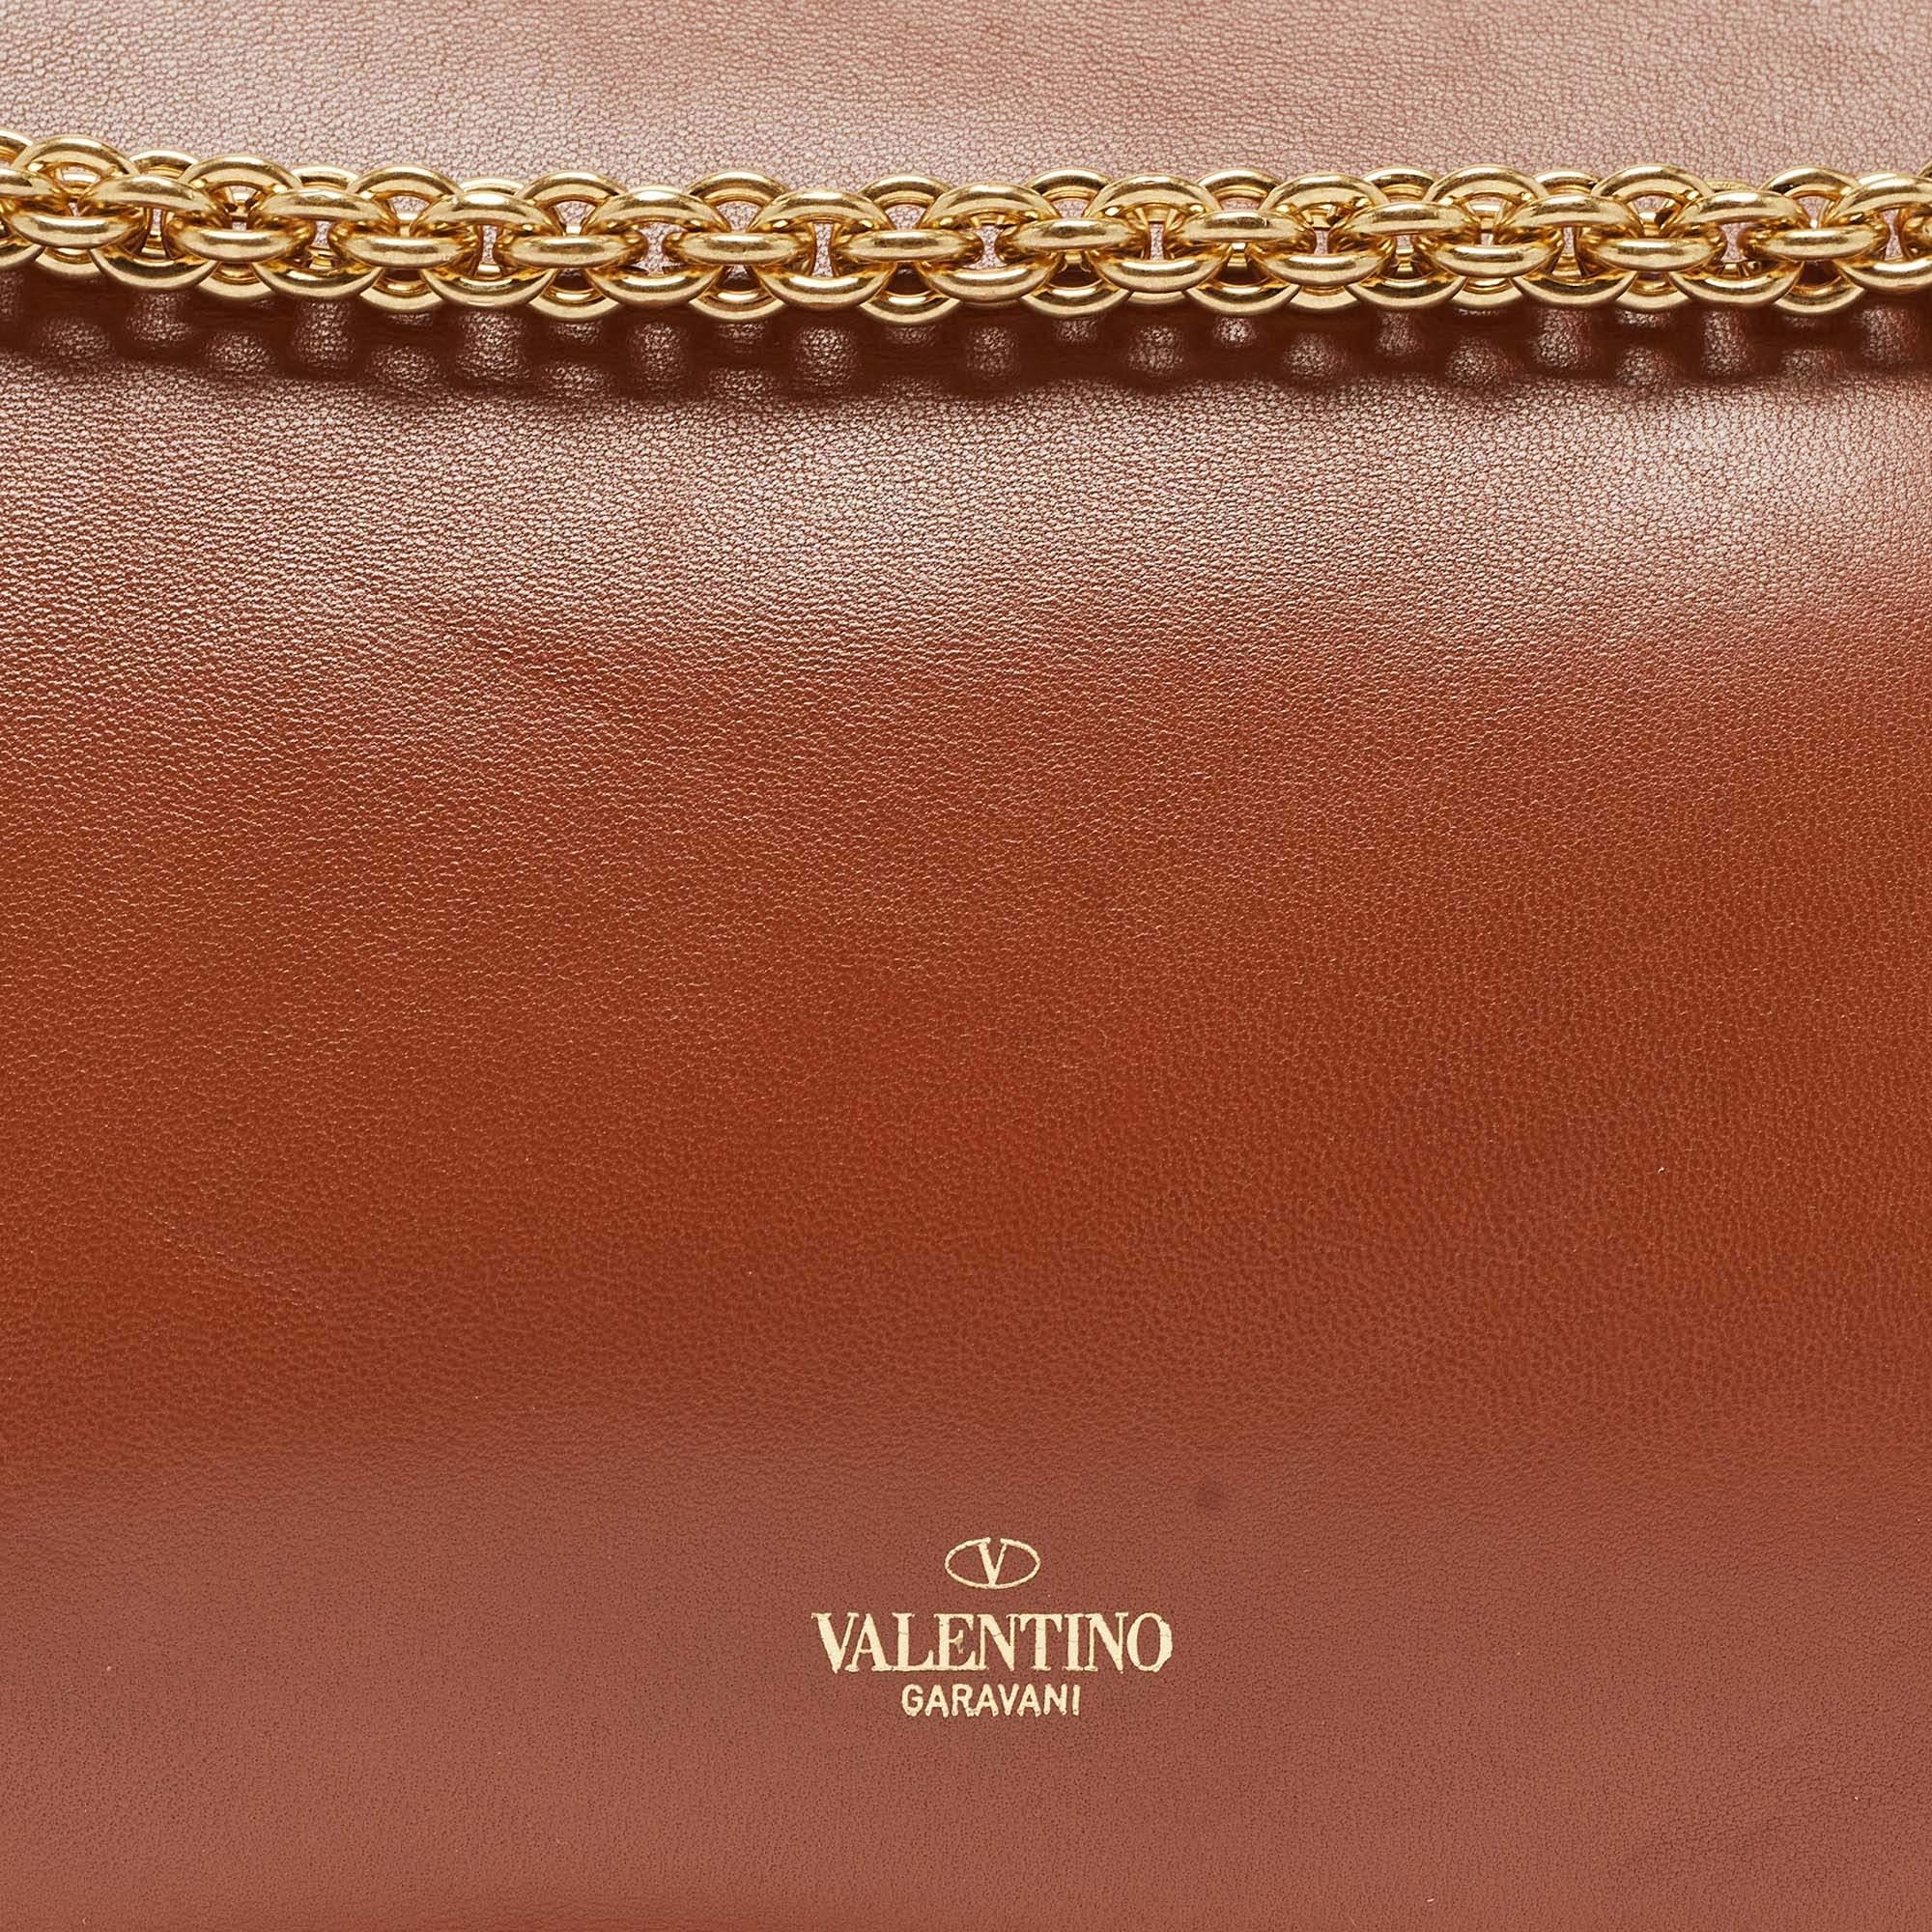 The Valentino handbag is a luxurious accessory crafted with precision. Made from high-quality materials, it features a timeless design with meticulous stitching, signature details, and durable hardware. Well-spaced and stylish, it exudes elegance